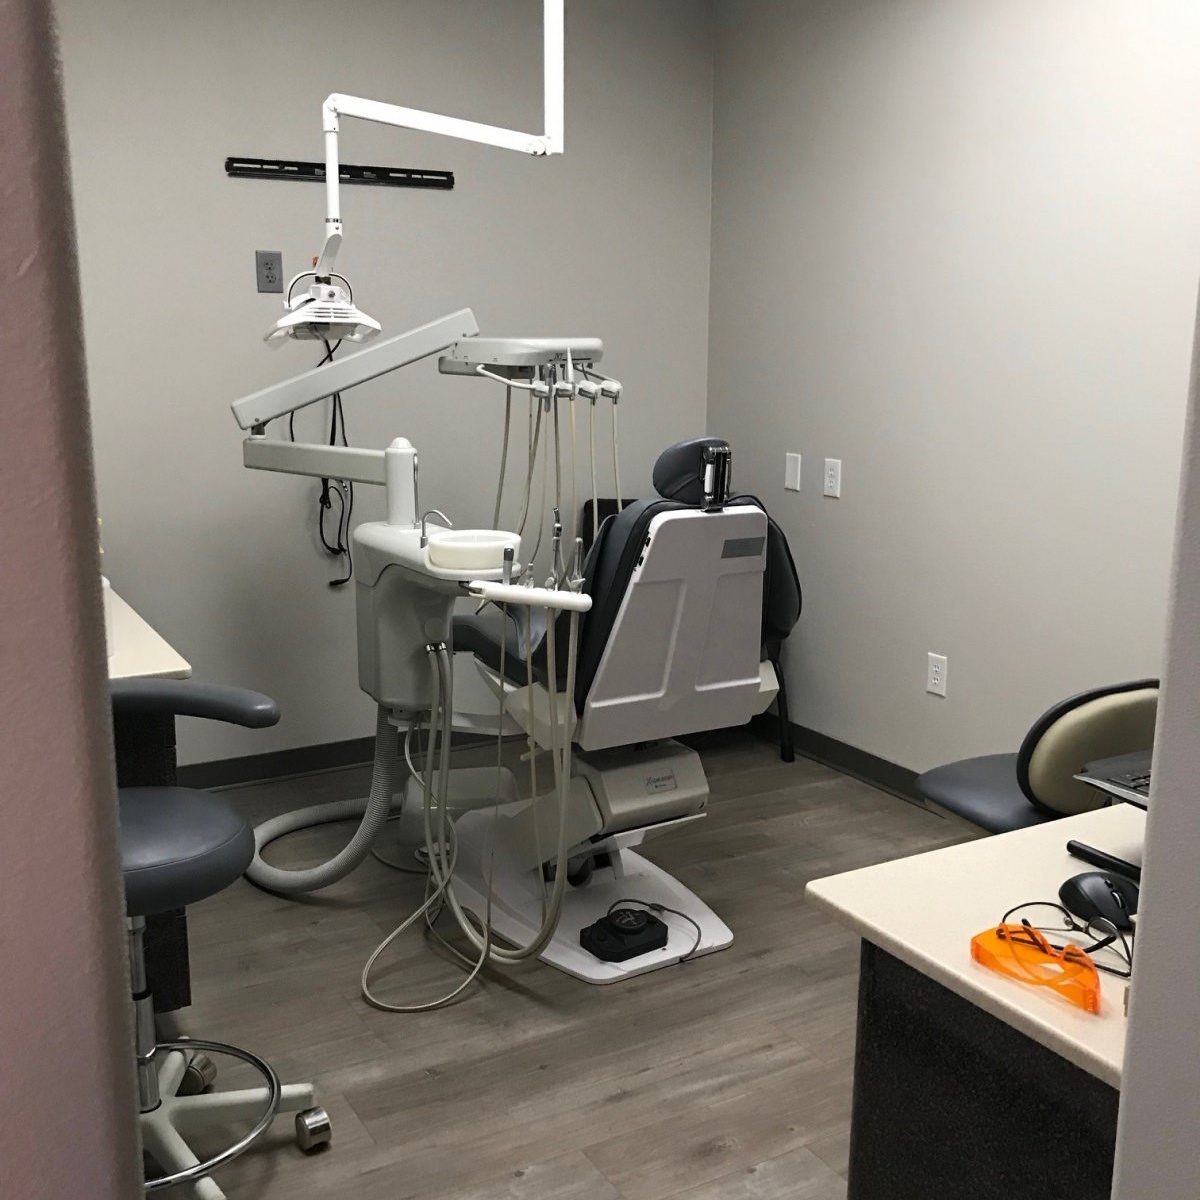 Dental room completed by Dry Creek Construction